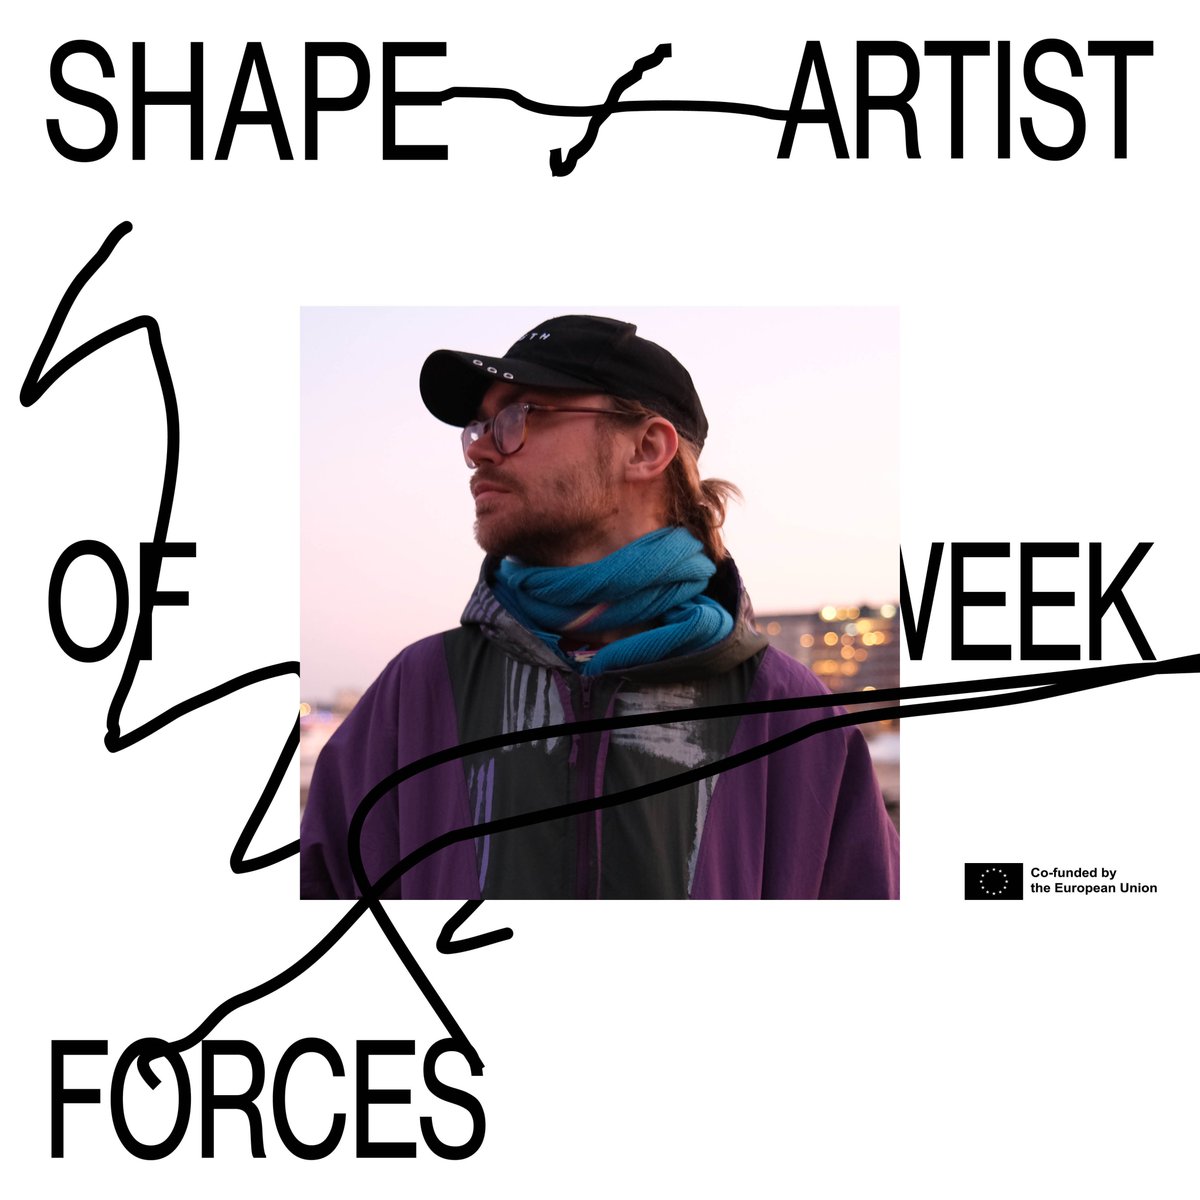 I will be 'artist of the week' at @SHAPEplatform this week, so I'll take over their IG account as well. Stay tuned for different Helsinki releated IG-stories. I'll try to cover underground culture here as well as I can!